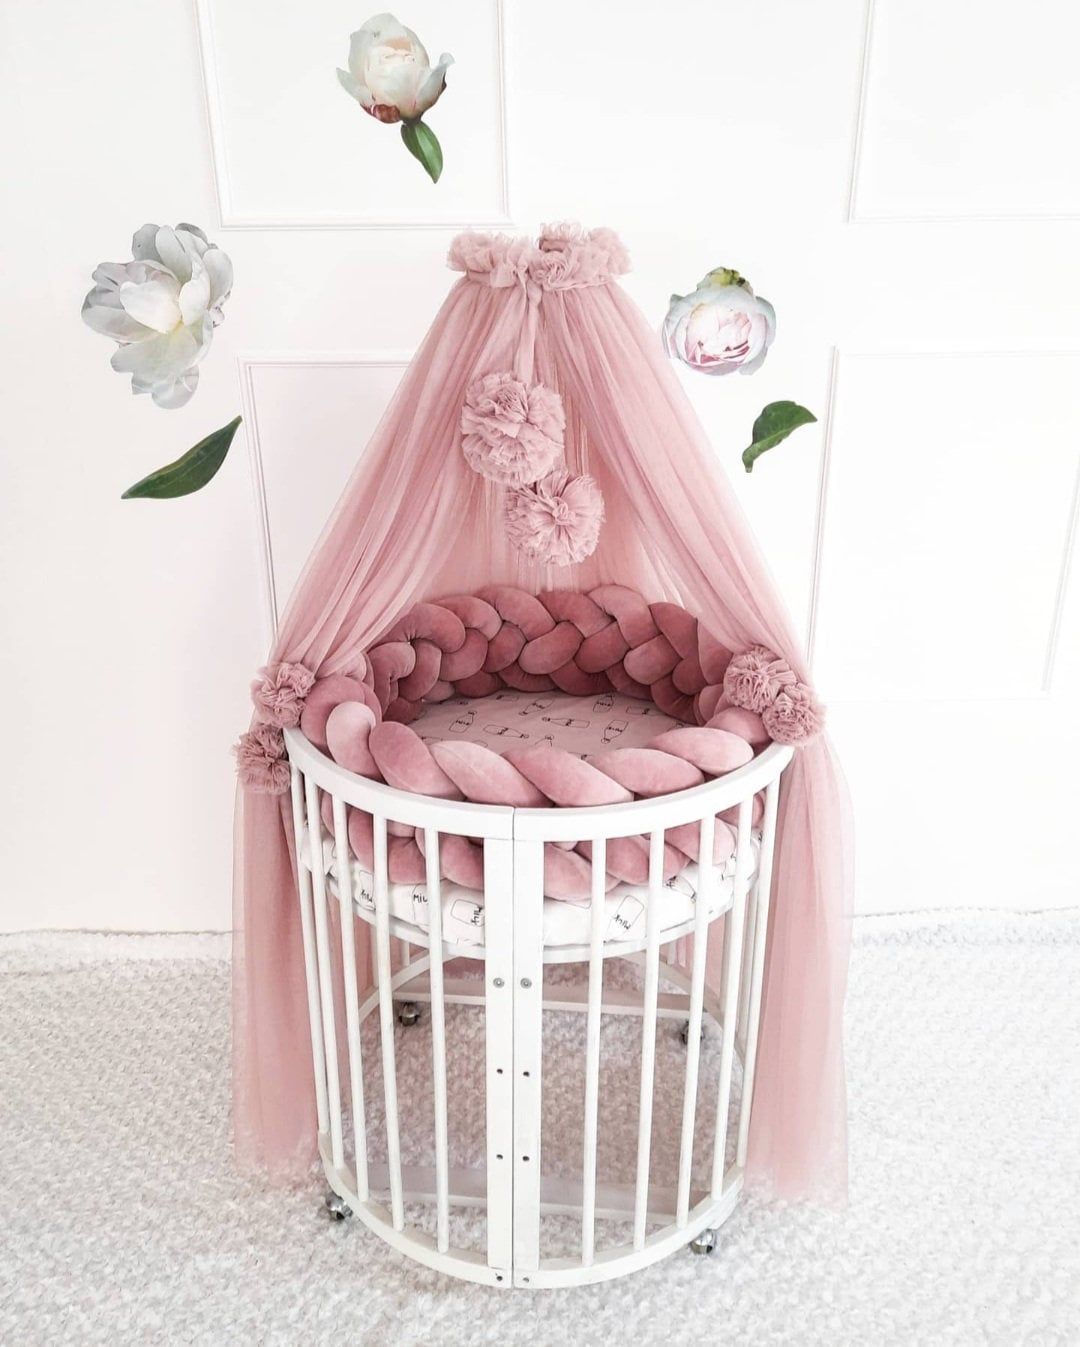 Canopy Bed tulle for nursery / Kids hanging tent for bedroom / Princess playhouse / Pom Pom canopy +Swan pillow as a gift